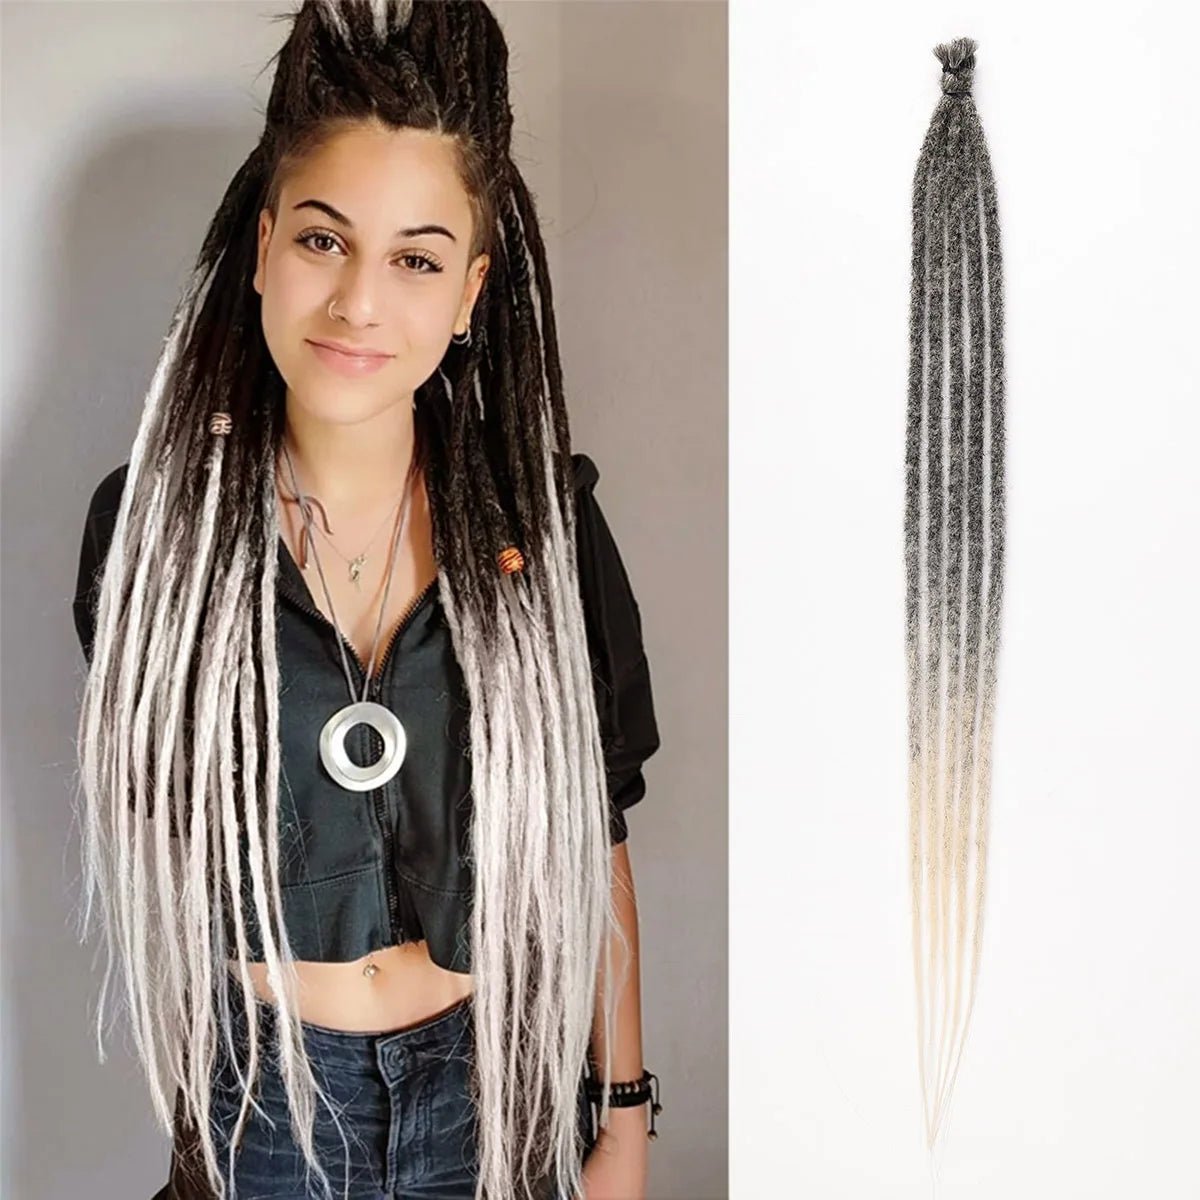 24 Inch Synthetic Dreadlock Extensions | 5 Strands Hippie Dreads | Ombre Color | 0.6 cm Width Loc Extensions | Reggae Style Crochet Hair ShopOnlyDeal